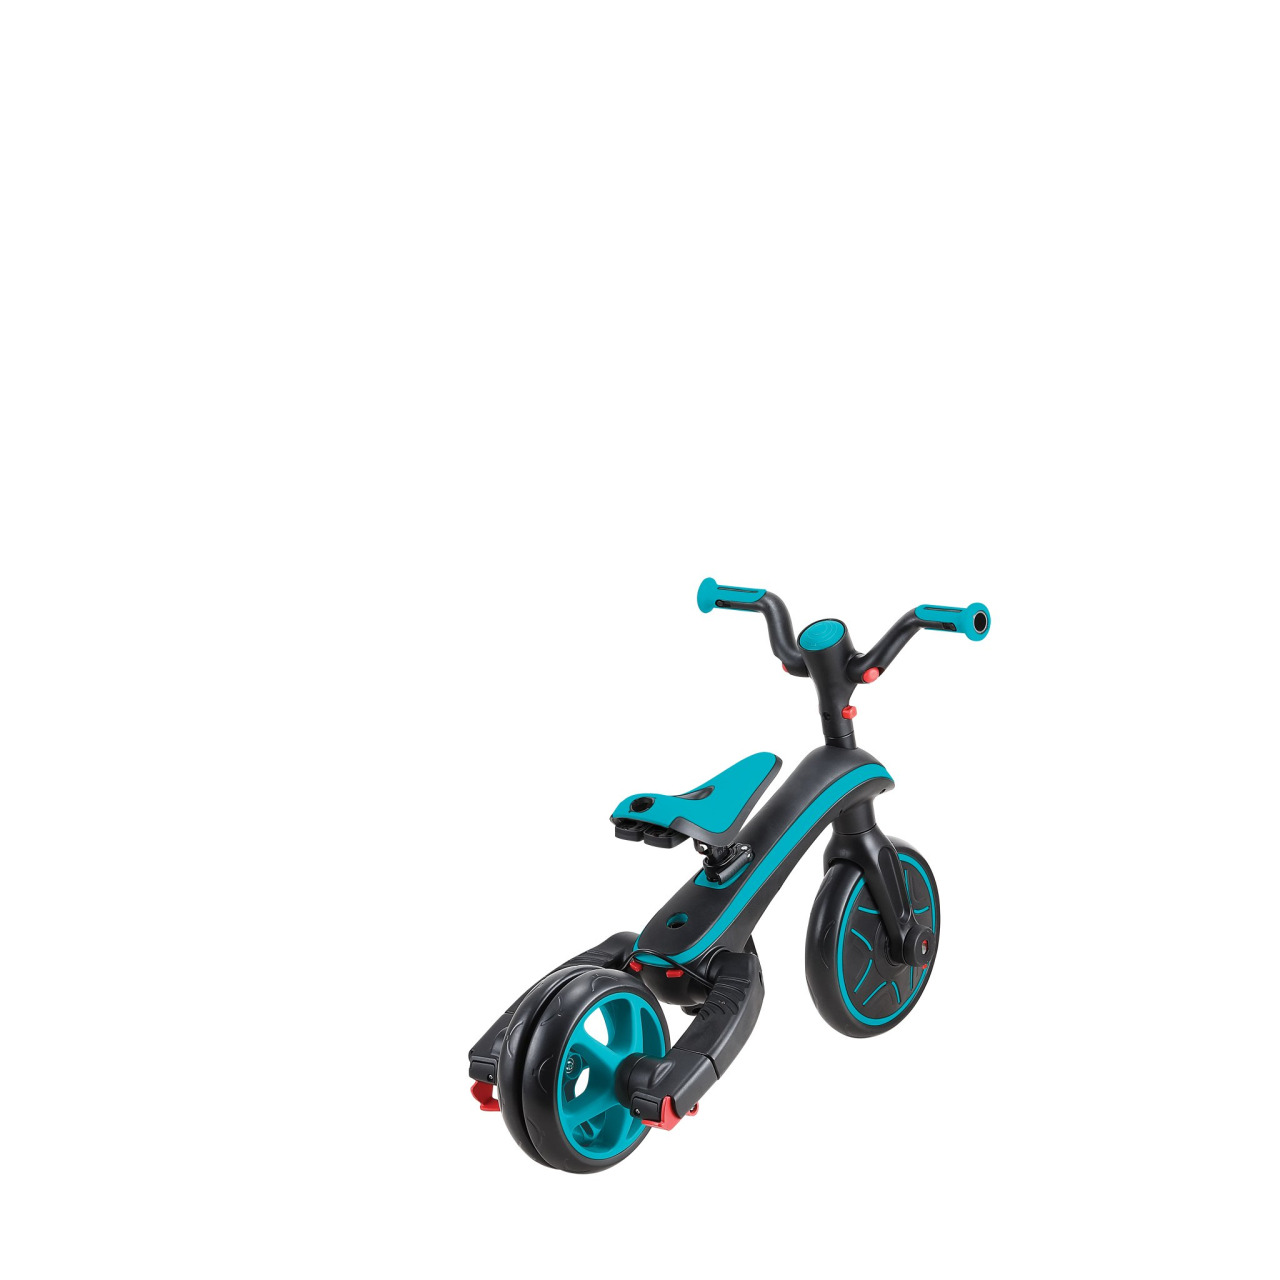 732 105 4 In 1 Tricycle With Smart Pedal Storage